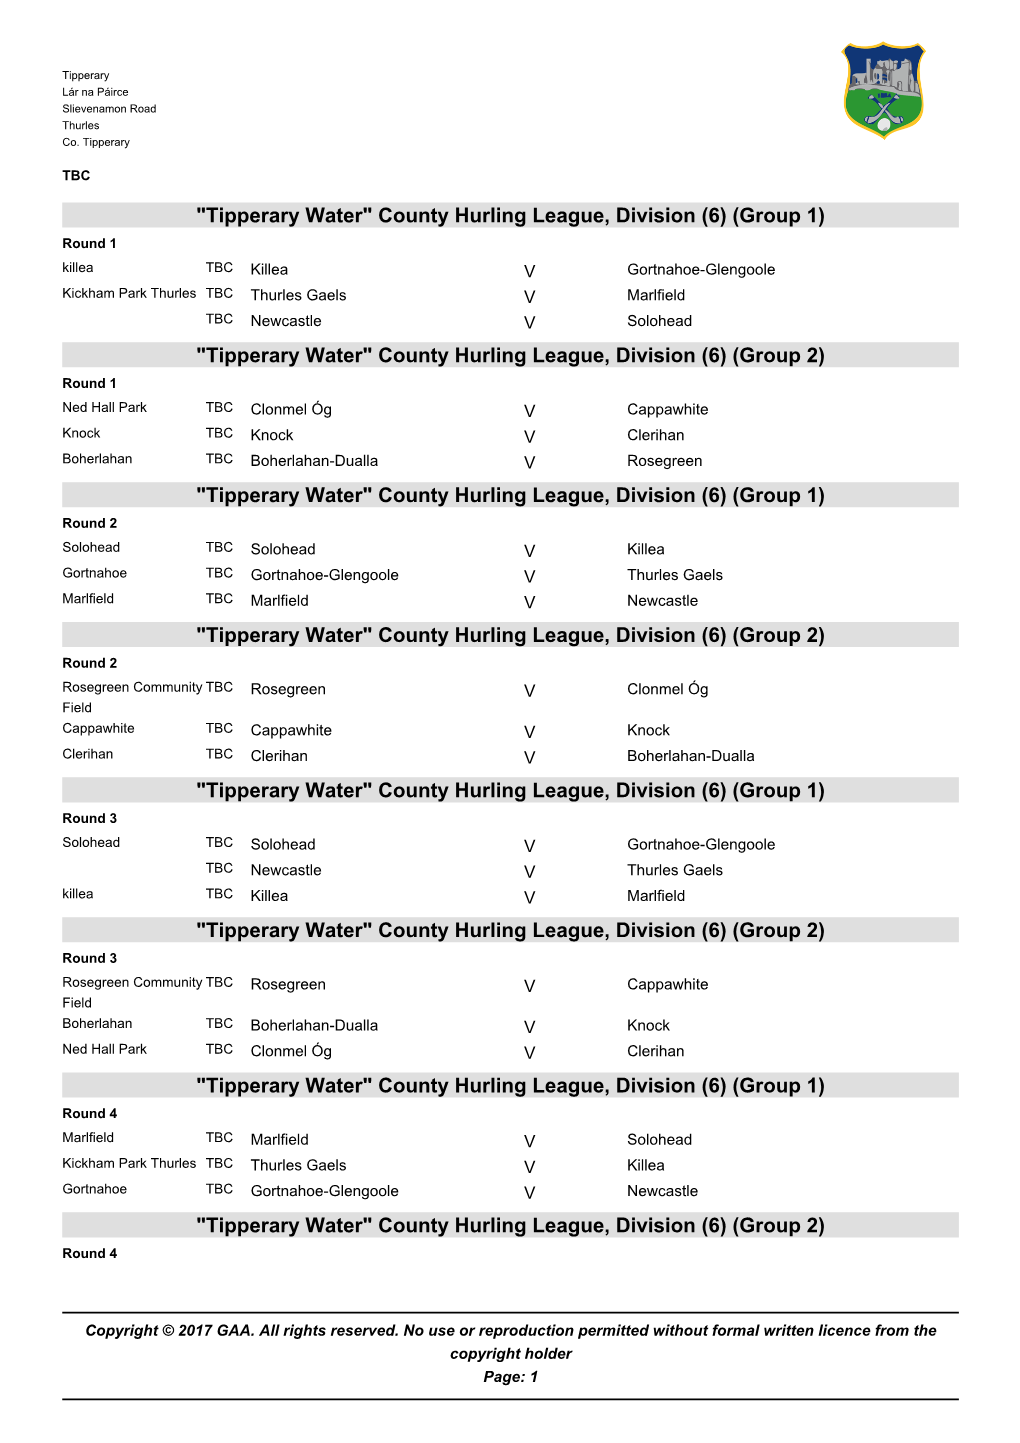 Tipperary Water County Hurling League Div 6 2017